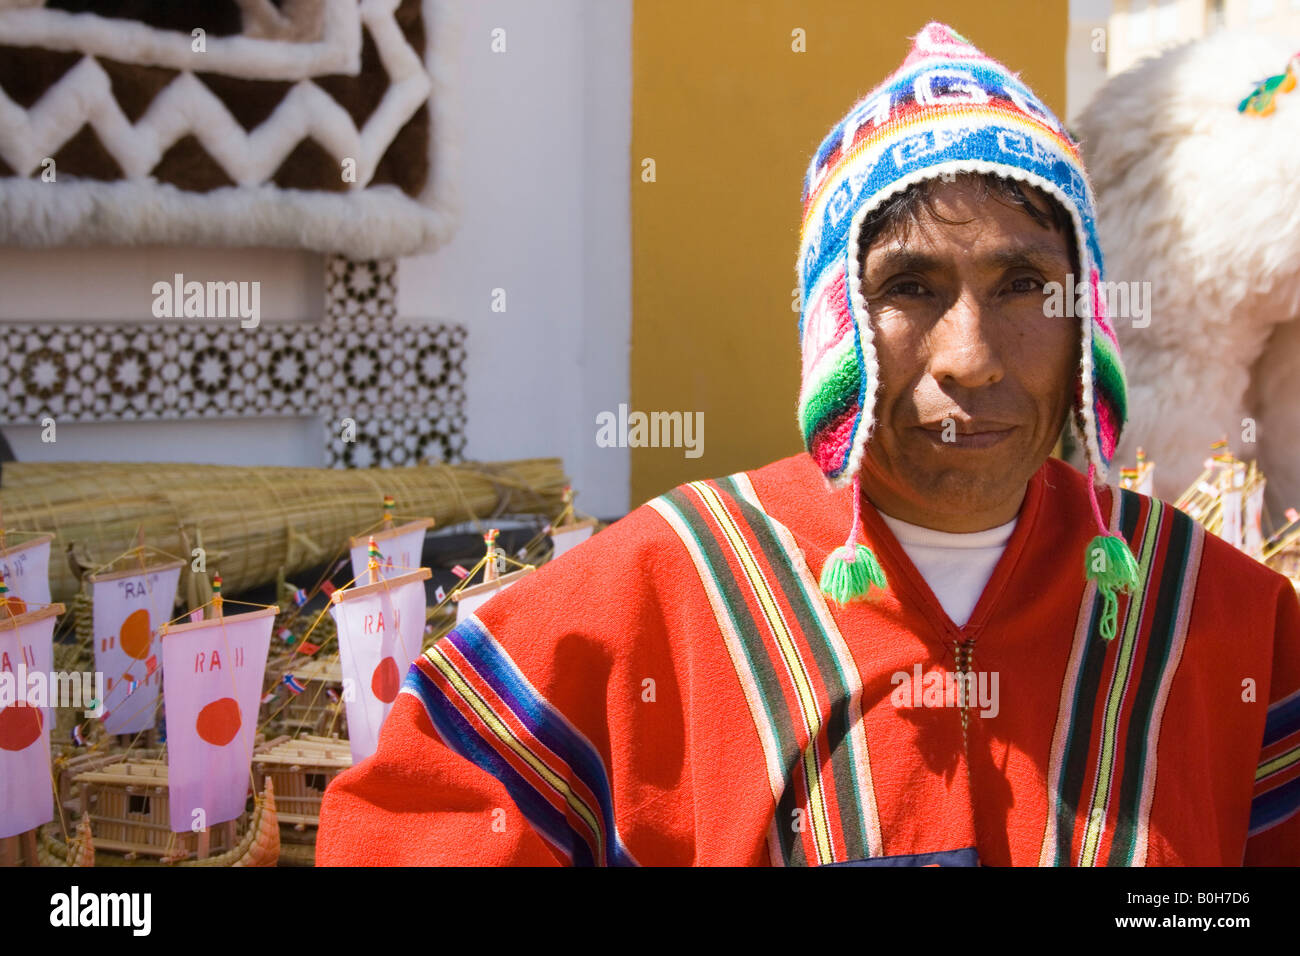 Man in traditional Bolivian costume Stock Photo